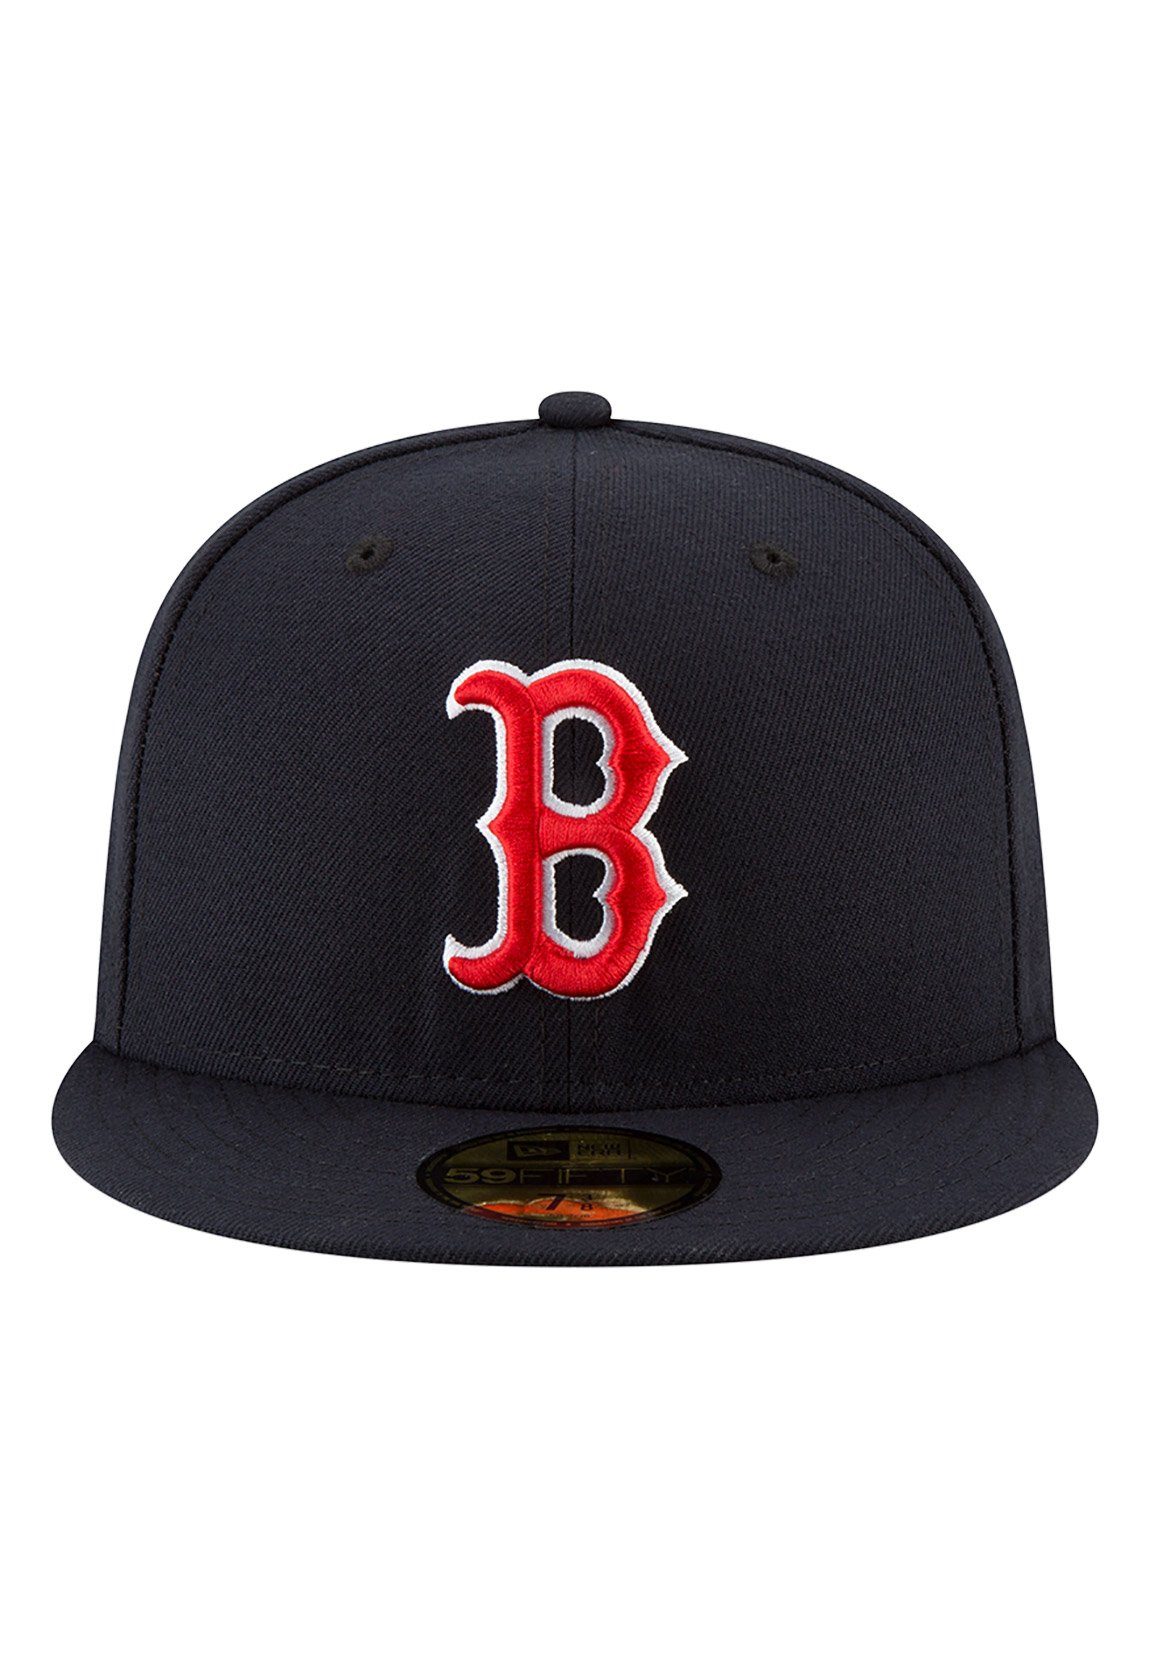 New Fitted Era Cap SOX BOSTON Era RED 59Fifty Fitted Authentics Rot New Dunkelblau Cap